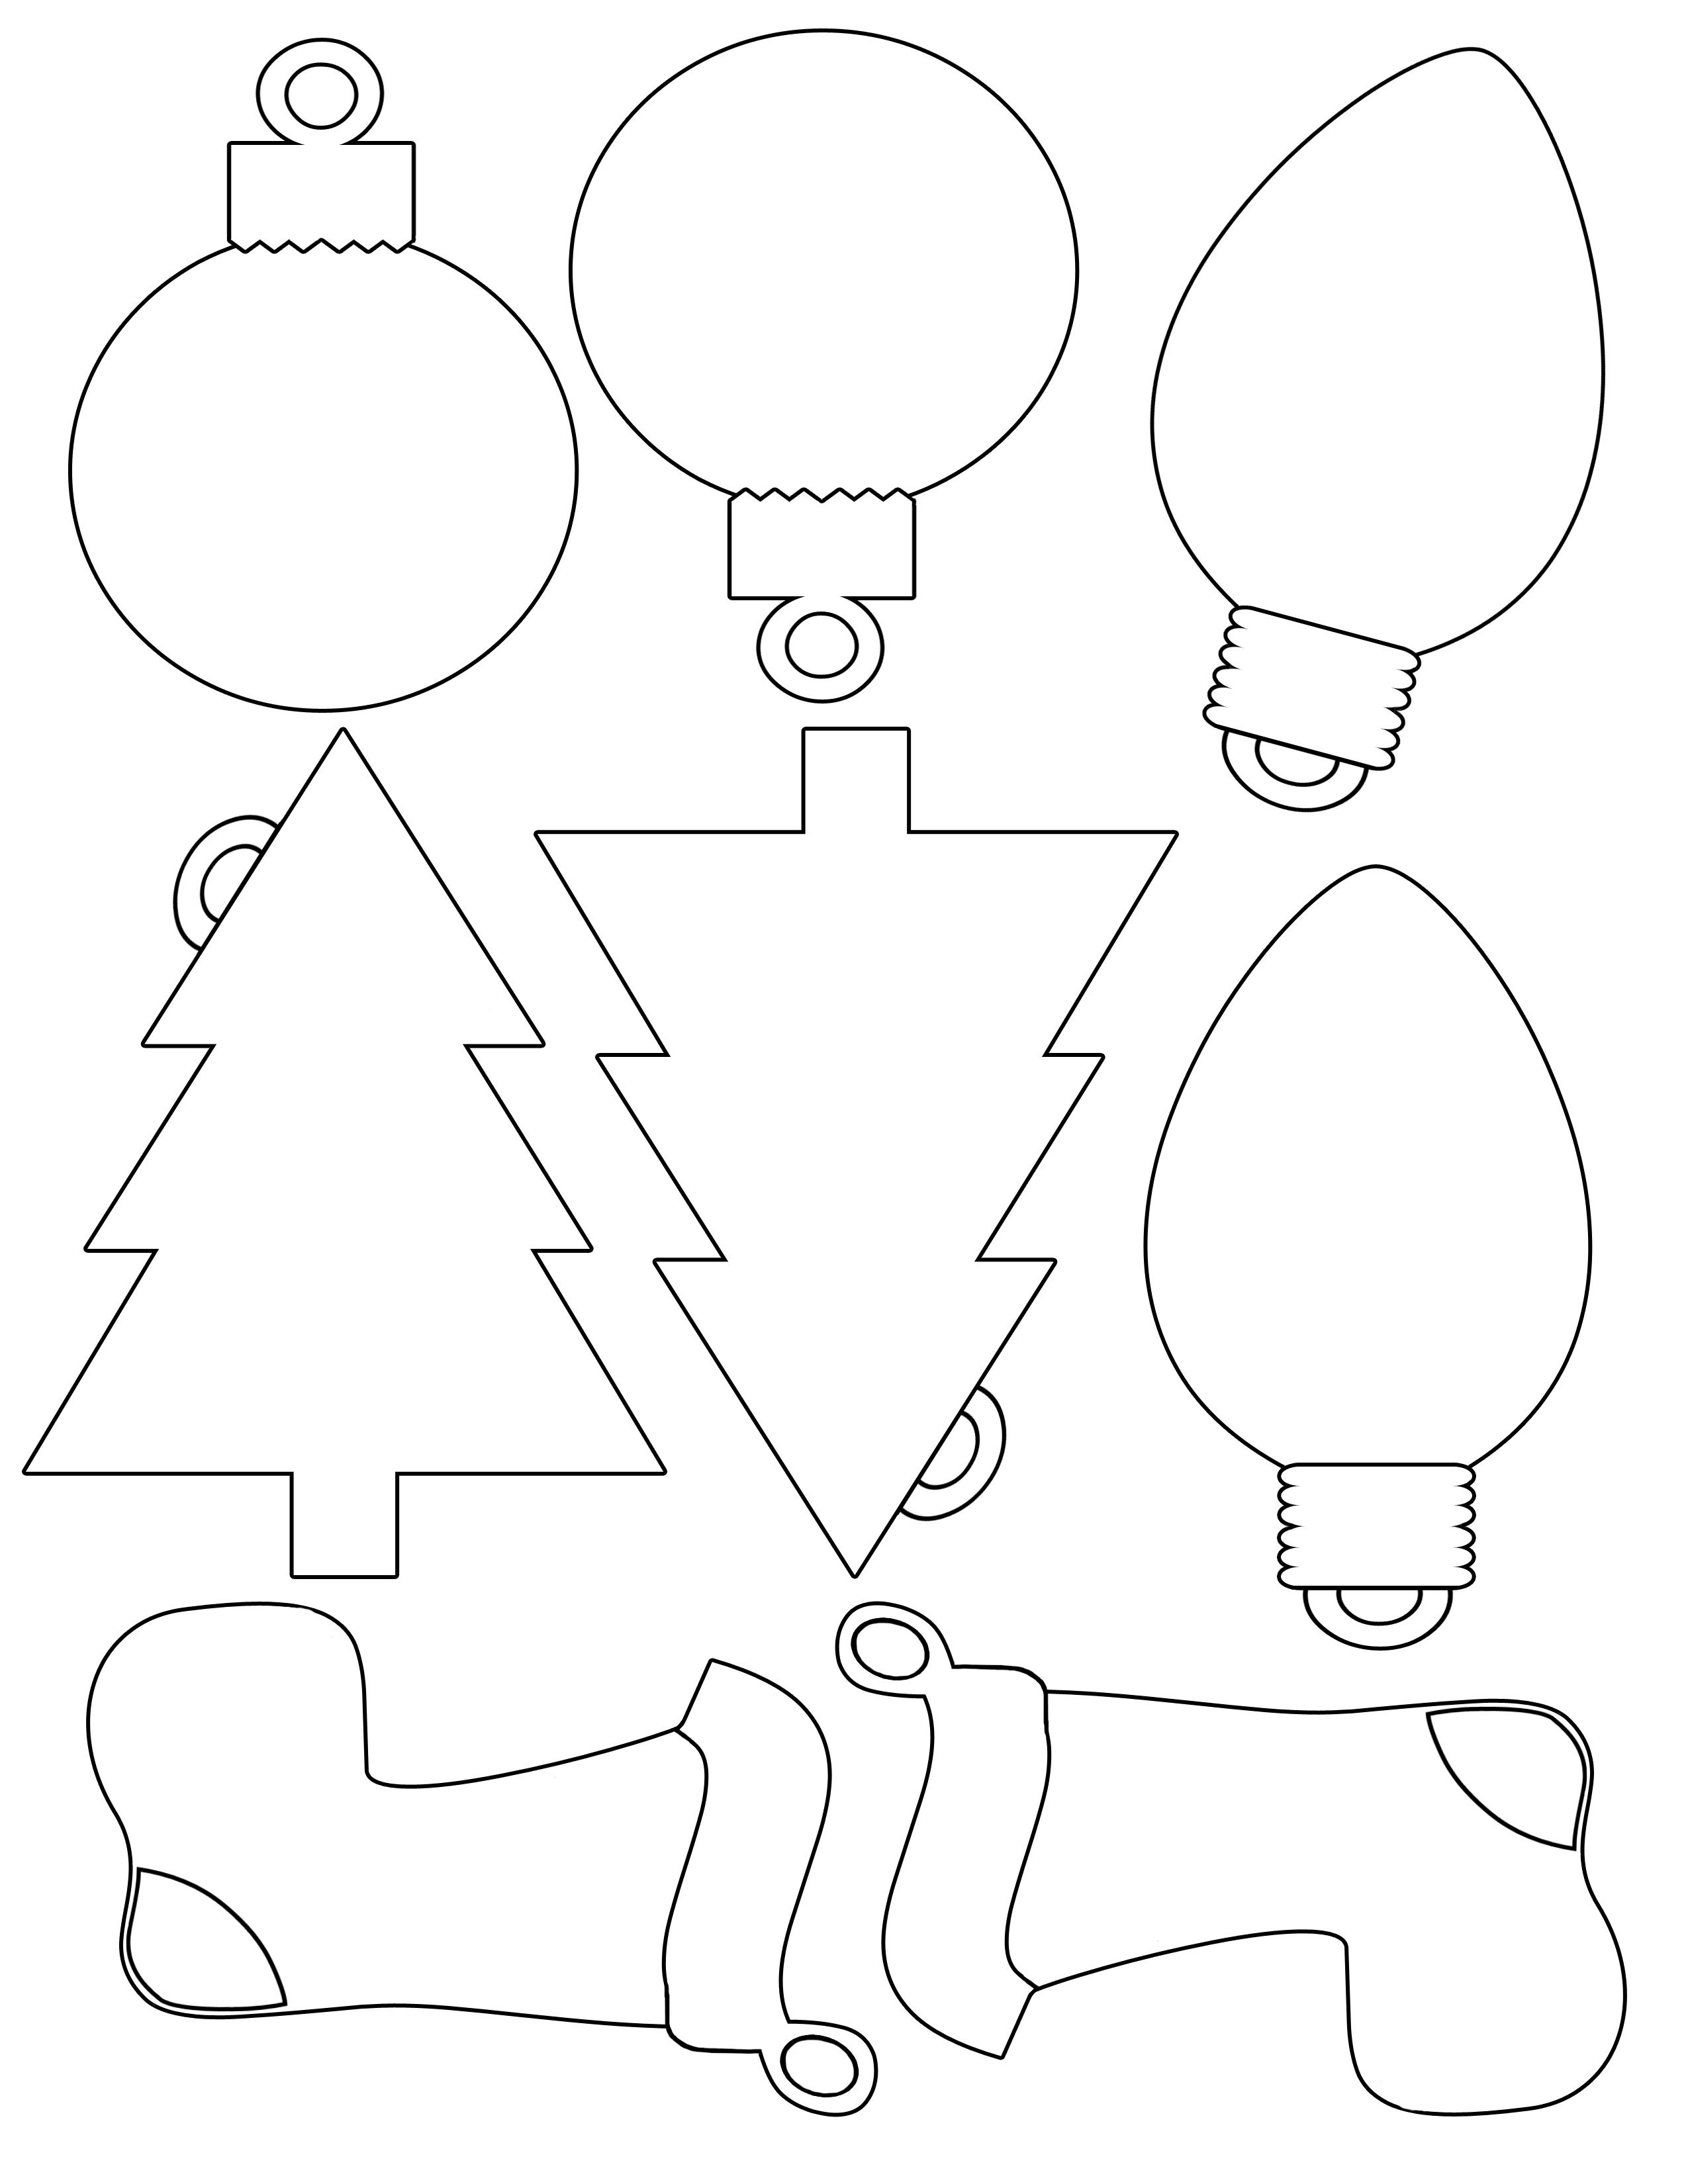 Printable Gift Tags Template | 14) Pics In Our Database For - Free Printable Felt Christmas Ornament Patterns